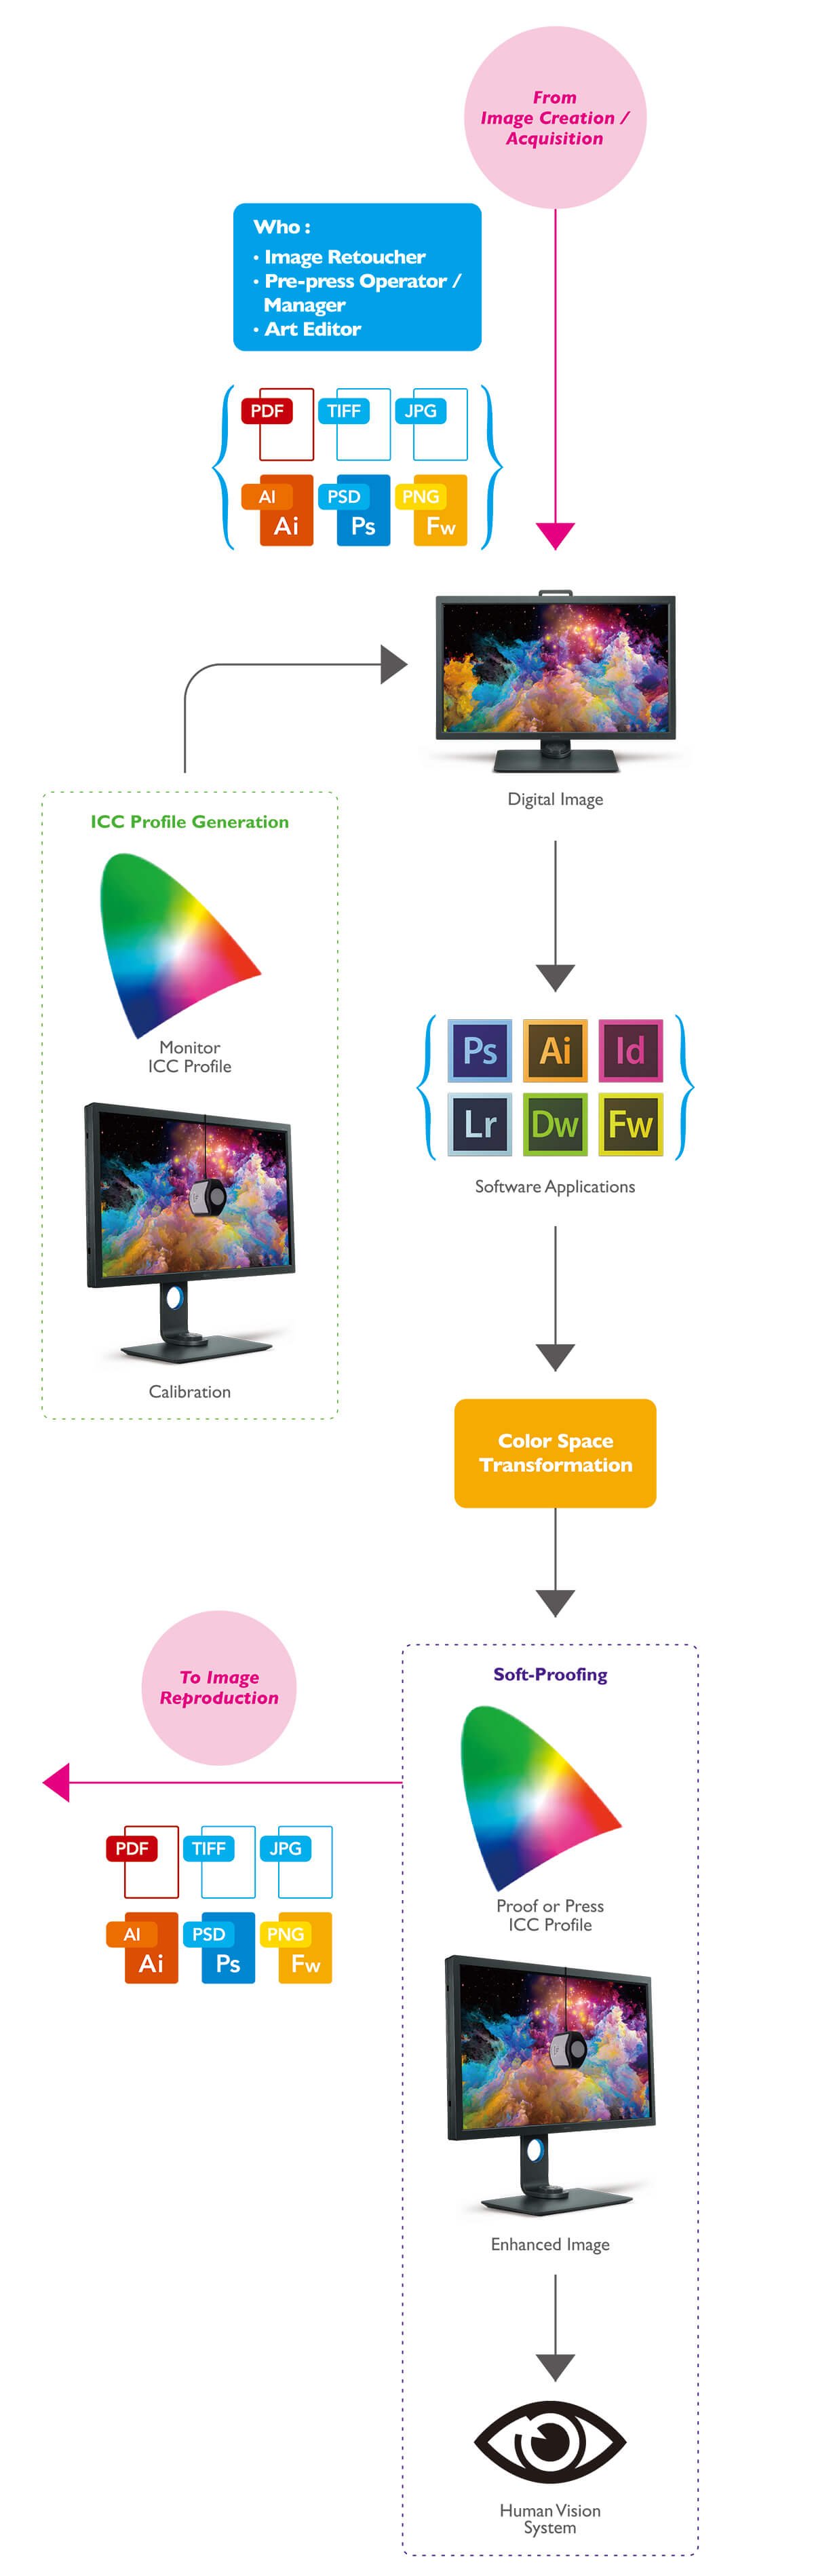 After processing image creation and image acquisition for the first step, professionals like image retouchers, pre-press operators and art editors will apply software applications and calibrated monitor to transform color space to enhance and reproduce the image. 